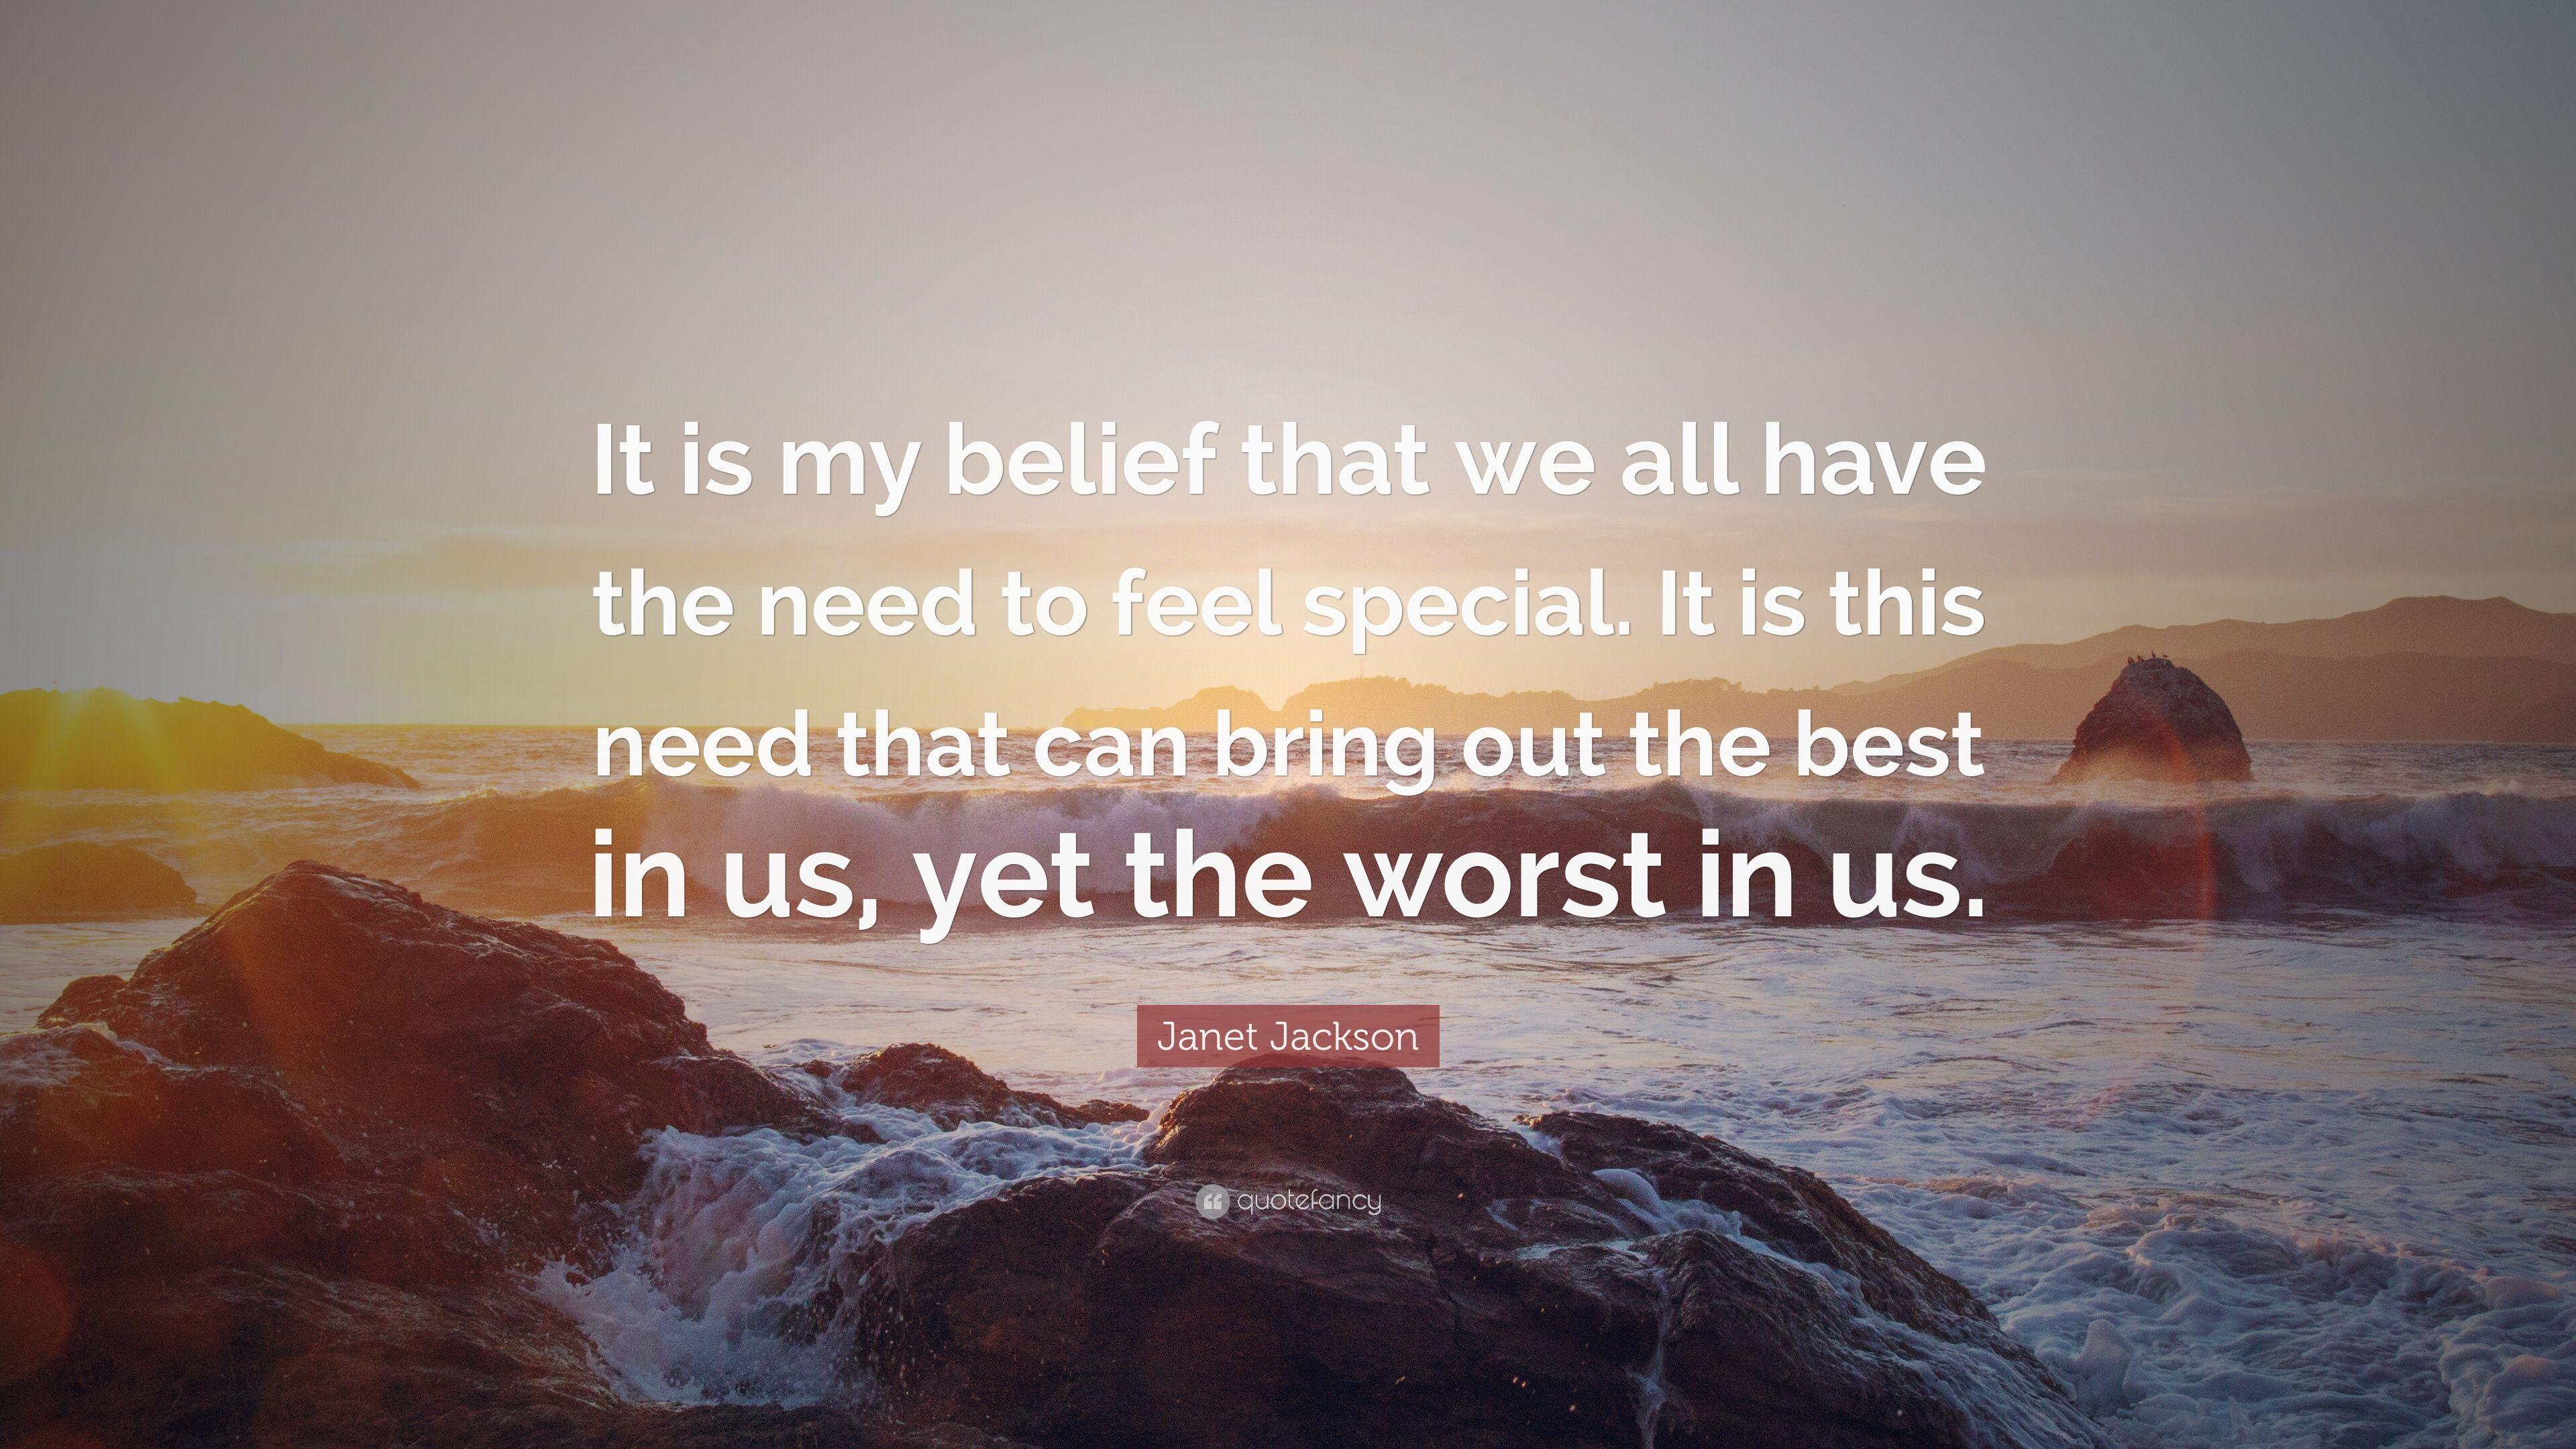 Janet Jackson Quote: “It is my belief that we all have